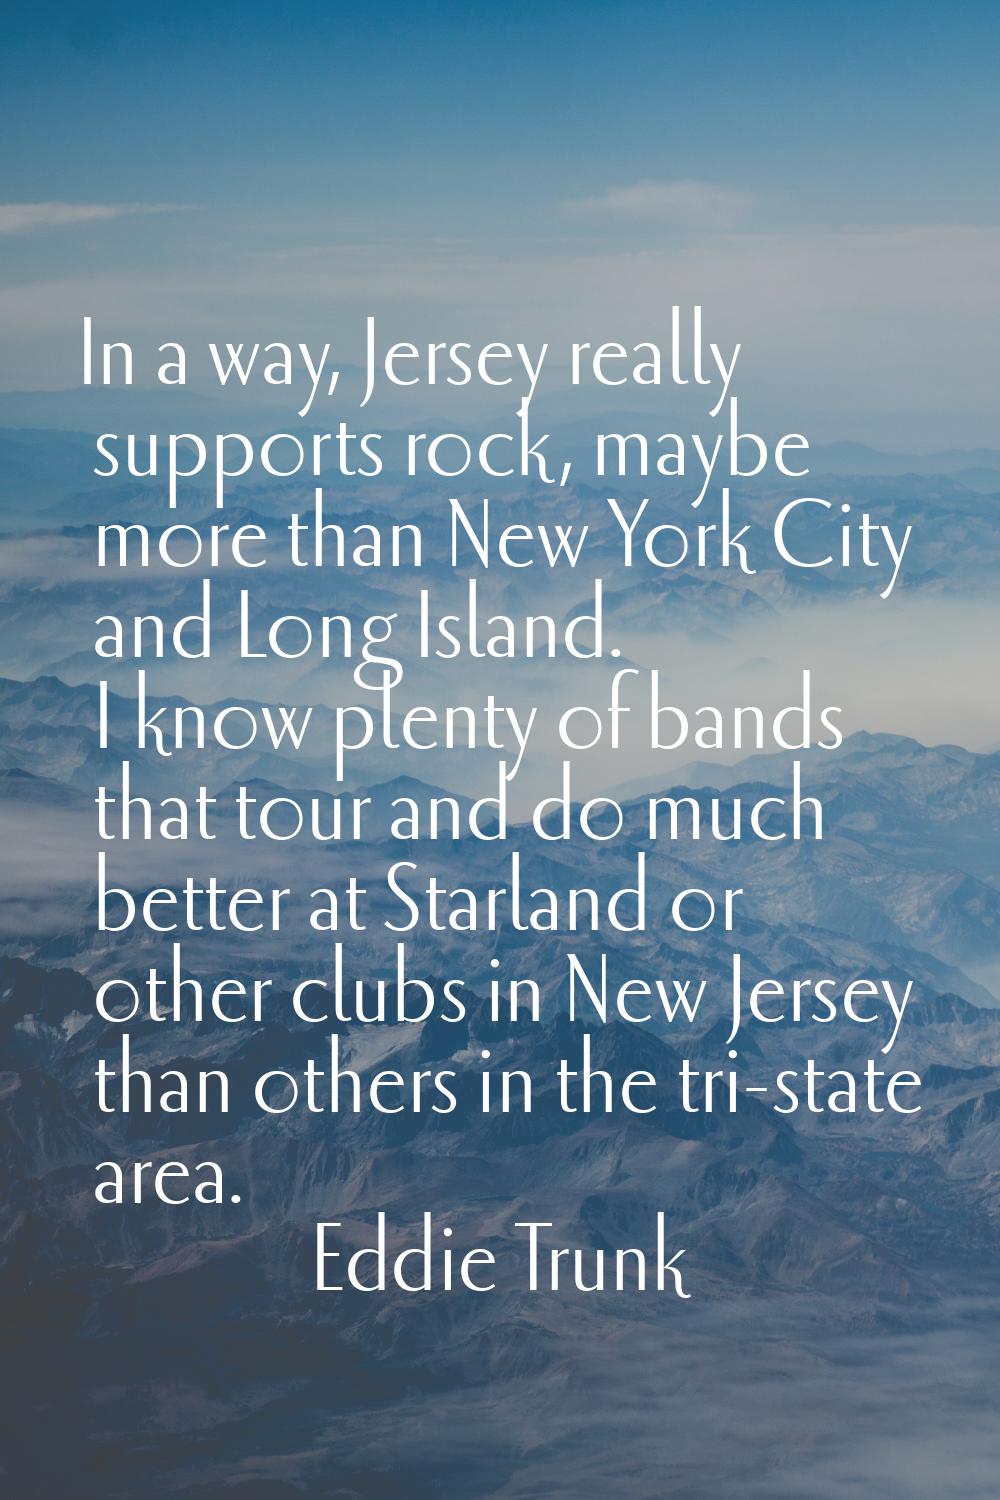 In a way, Jersey really supports rock, maybe more than New York City and Long Island. I know plenty